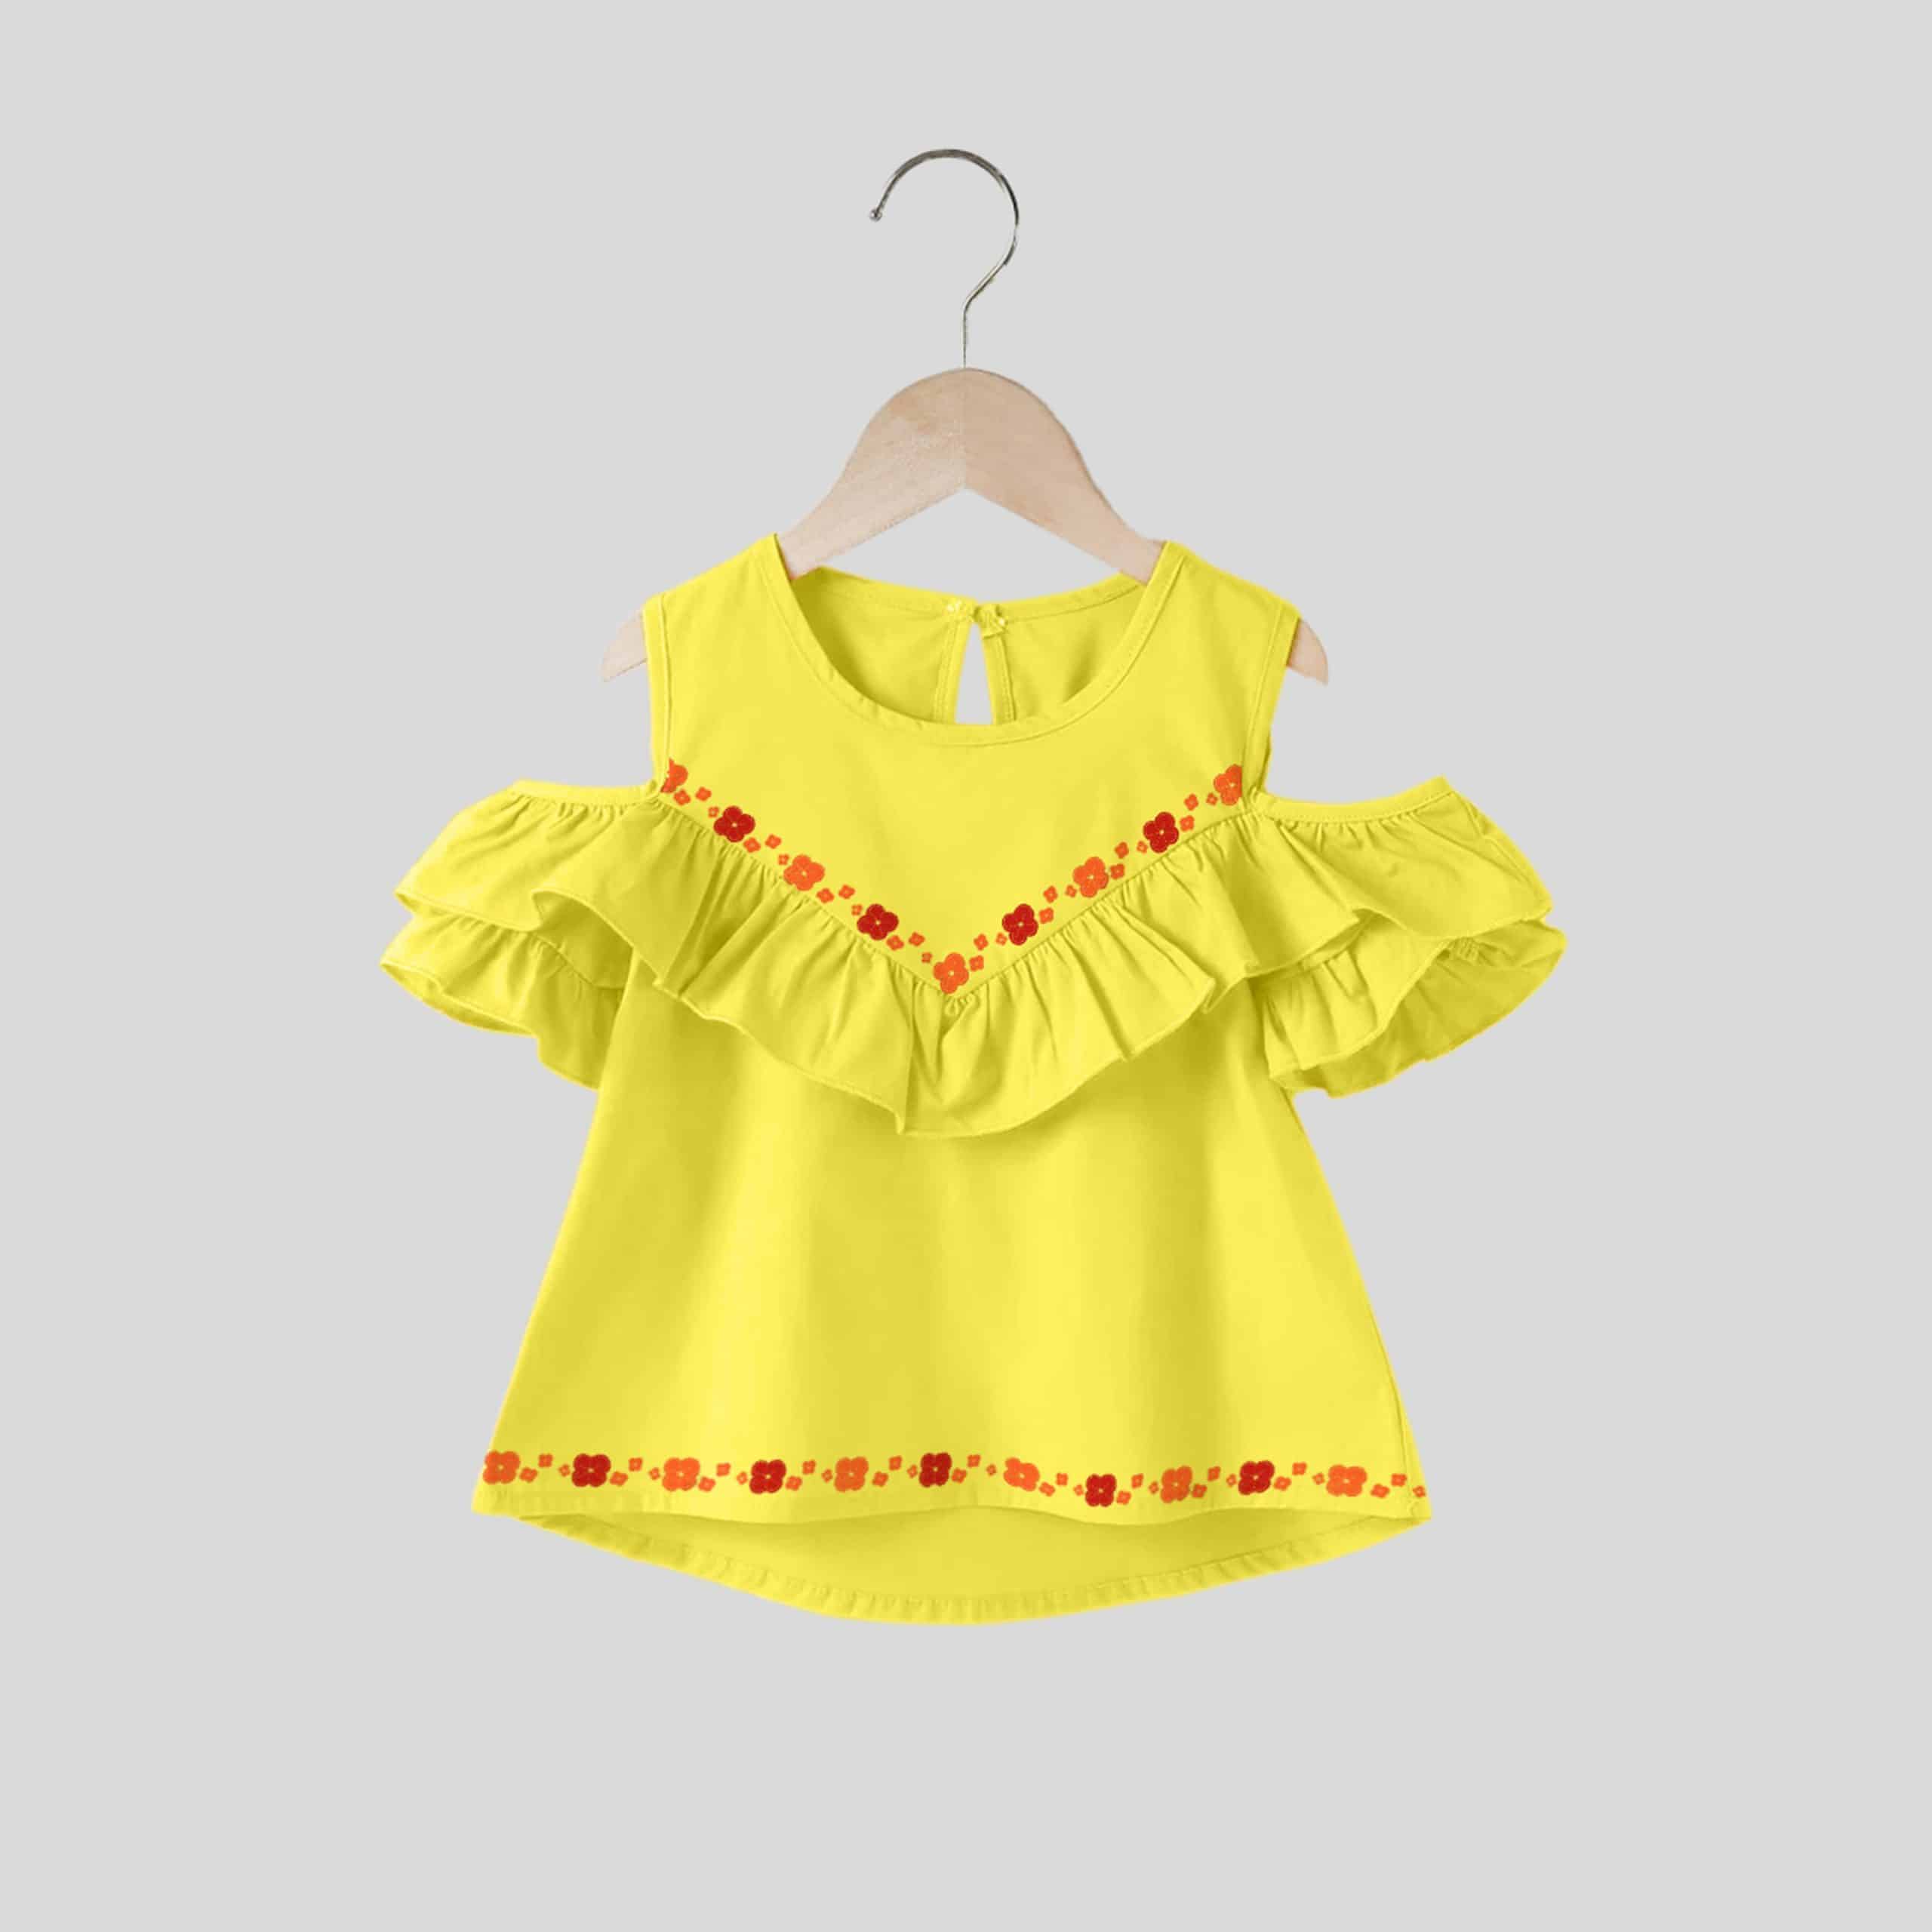 Girls yellow cut out sleeve frill dress with floral print trim-RKFCW263